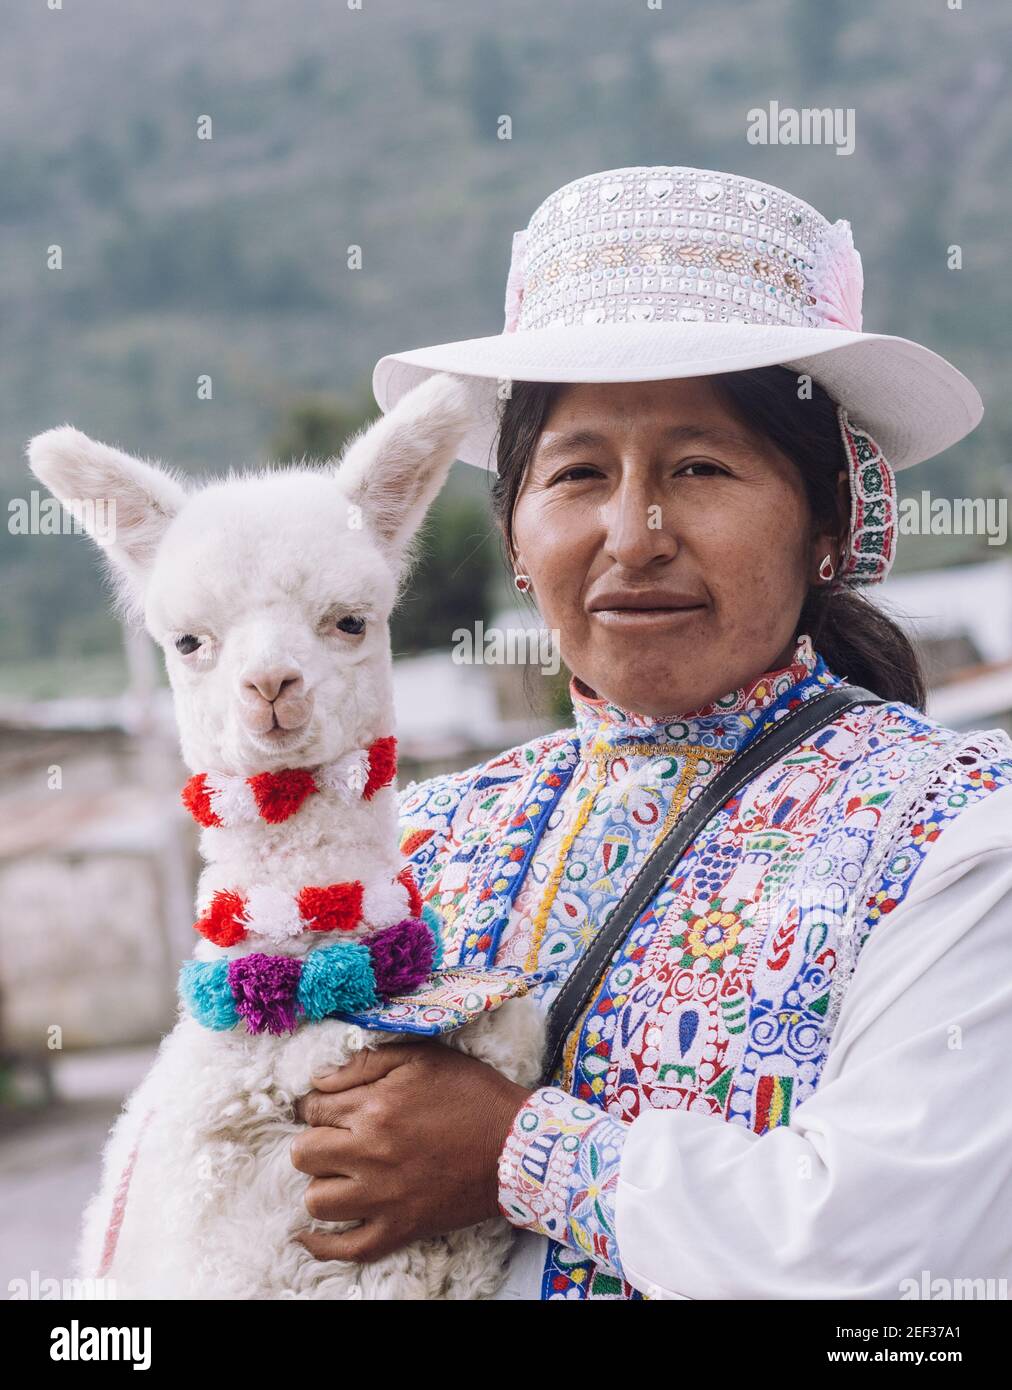 YANQUE, COLCA VALLEY, PERU - JANUARY 20, 2018: Native woman poses for a portrait holding a baby alpaca with typical costume in the traditional Colca v Stock Photo